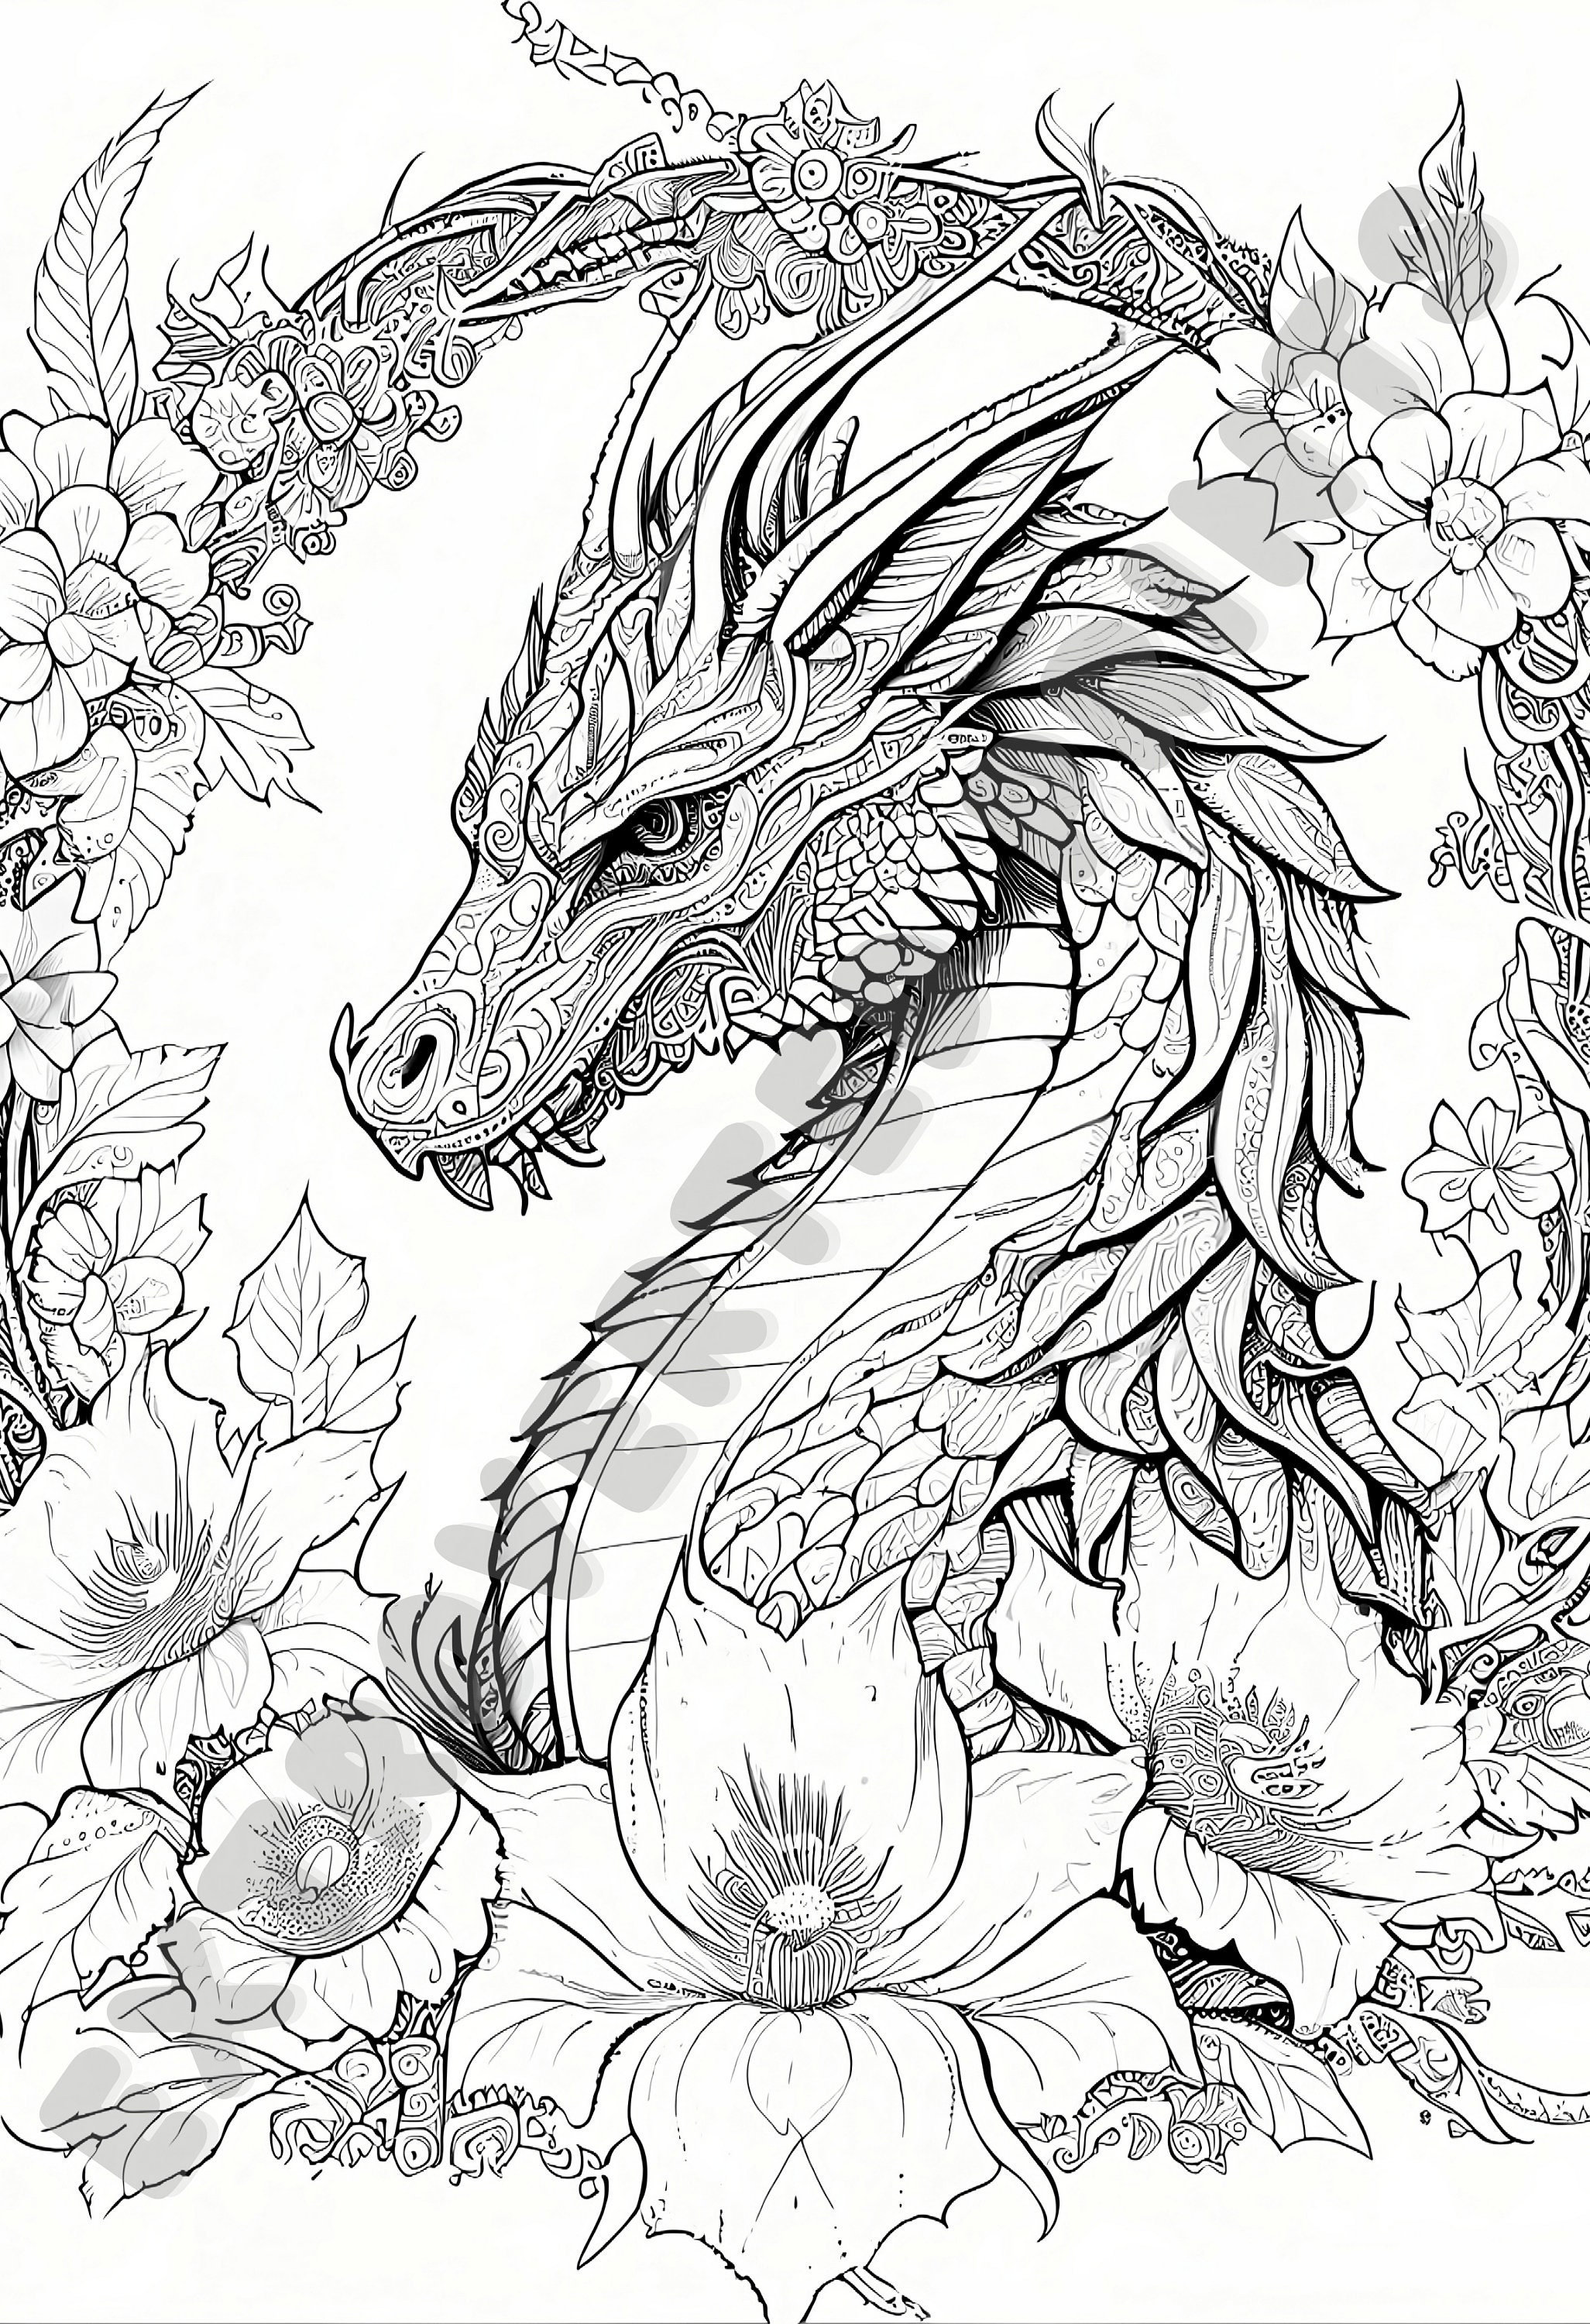 Targaryen Dragon Coloring Page for Kids and Adults Who Etsy